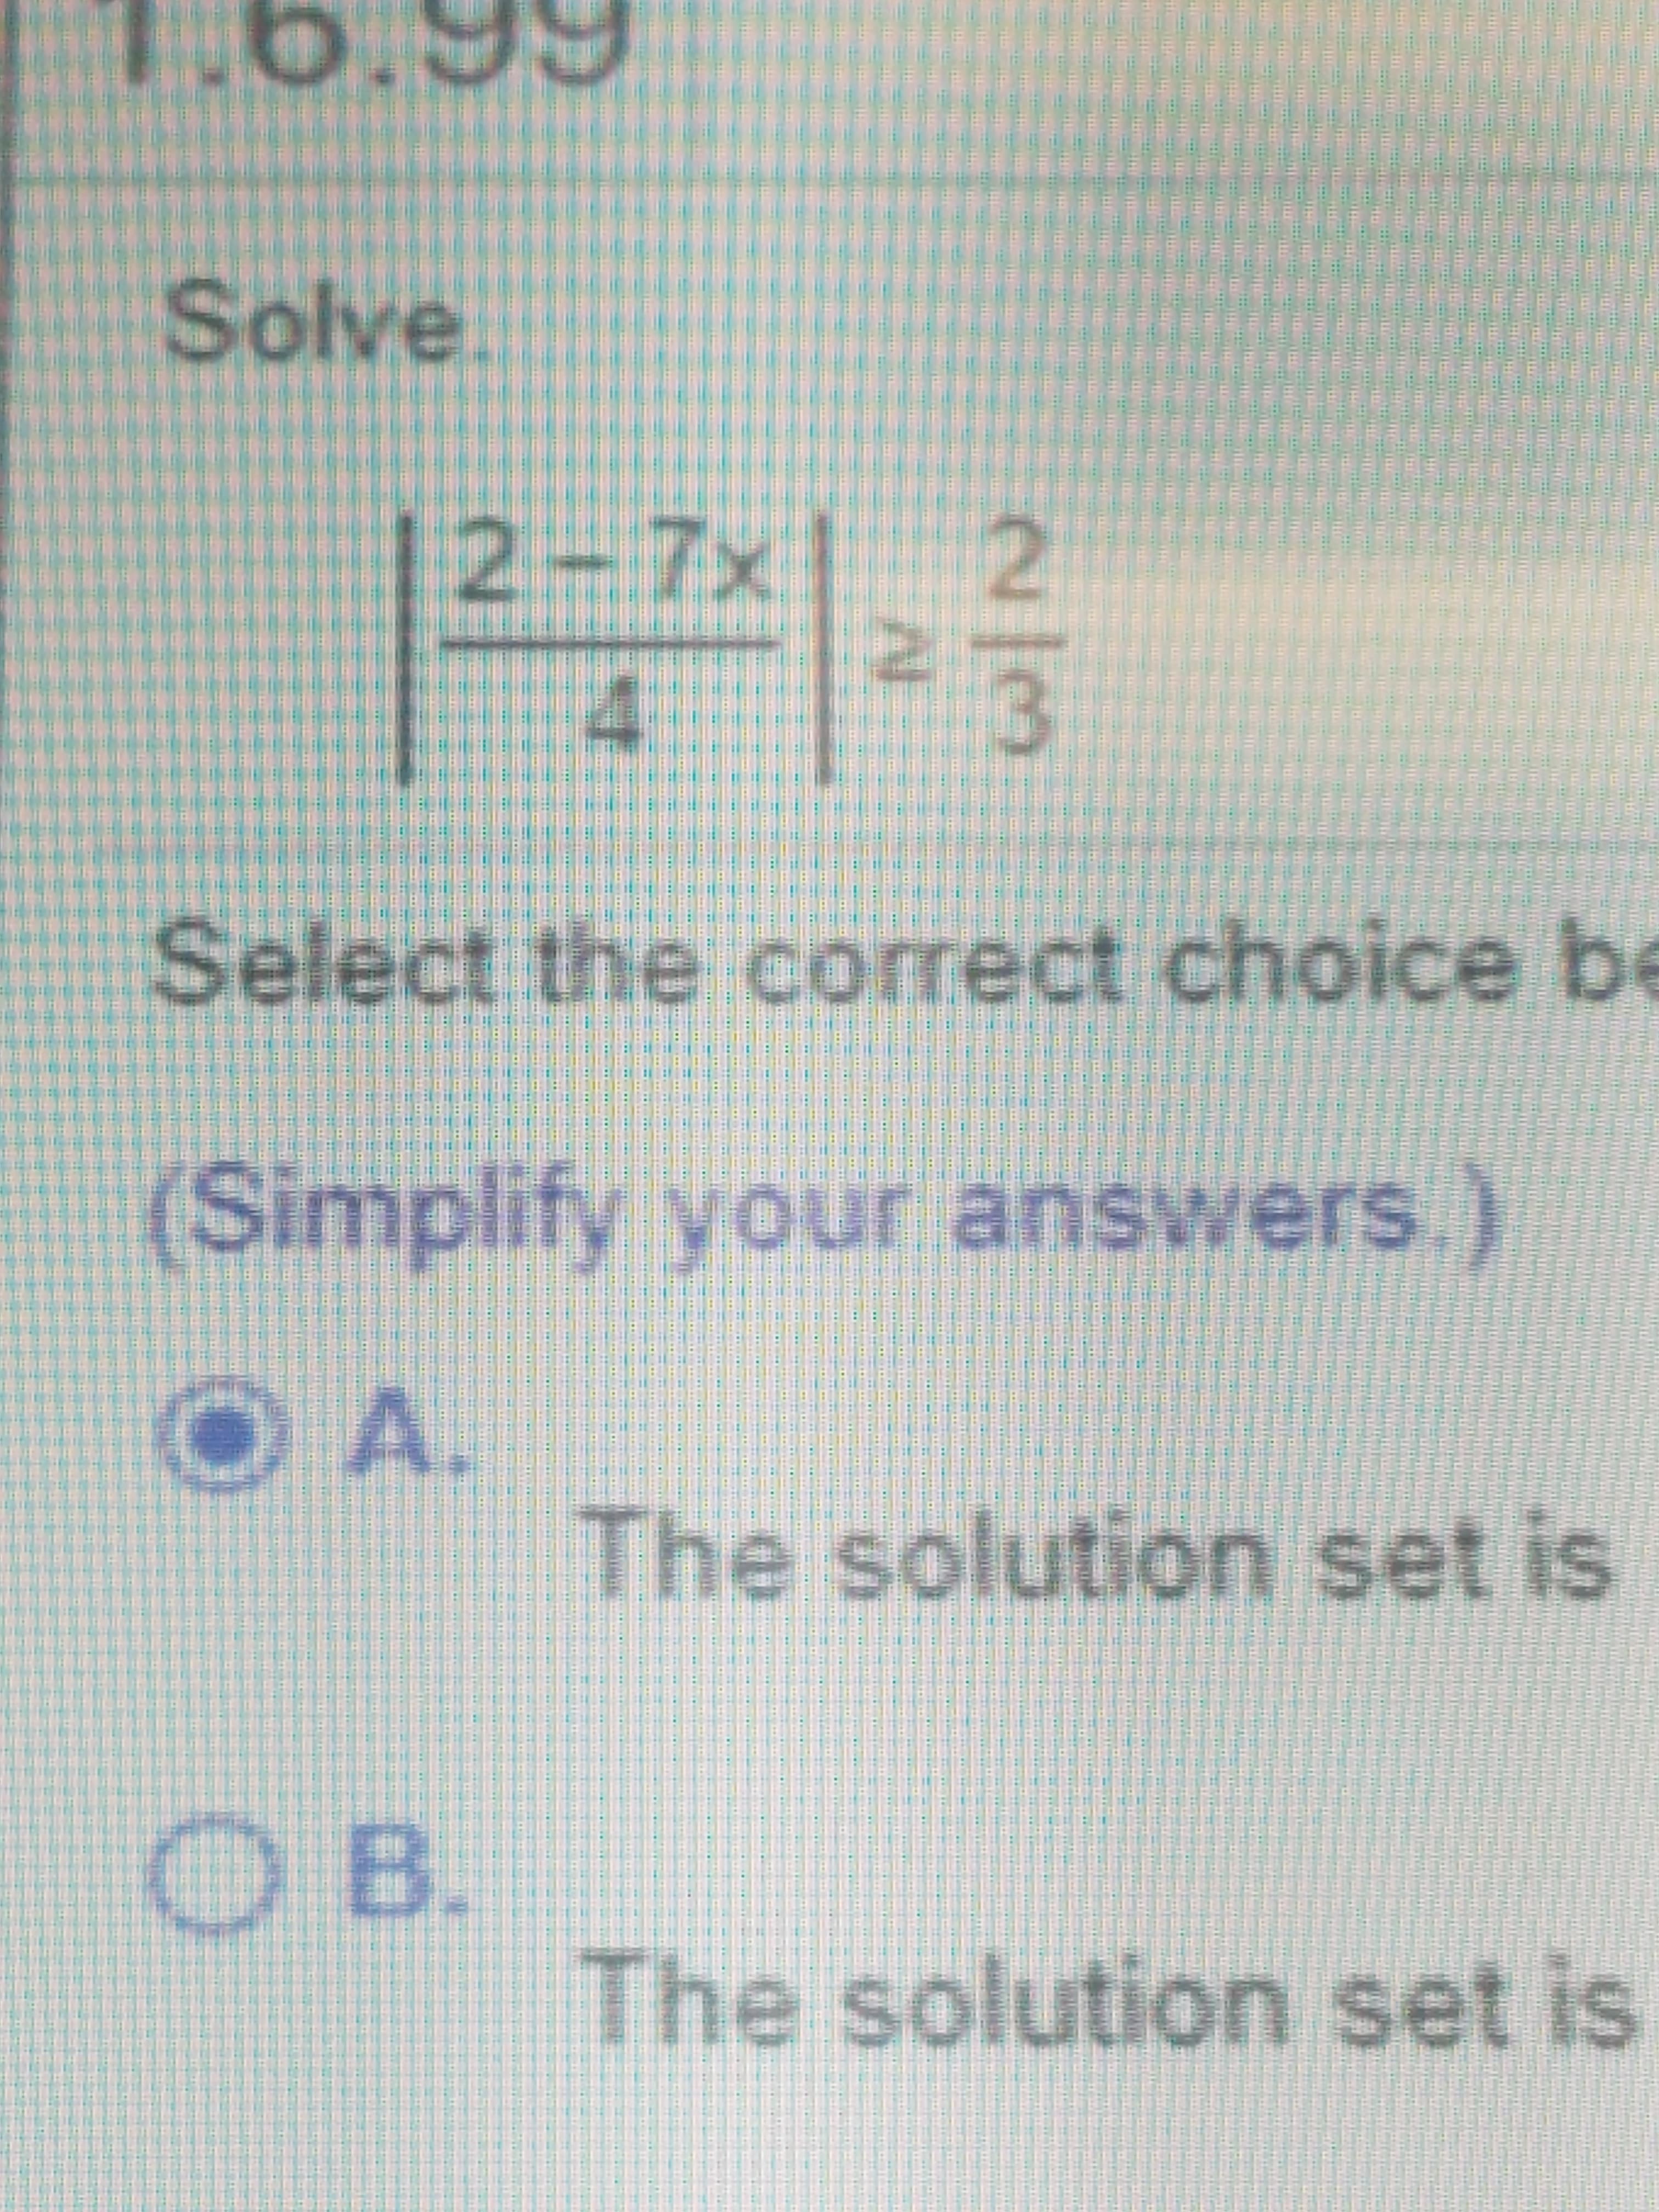 Solve
12-7x 2
3
4
Select the correct choice be
(Simplify your answers.)
O A.
The solution set is
O B.
The solution set is
